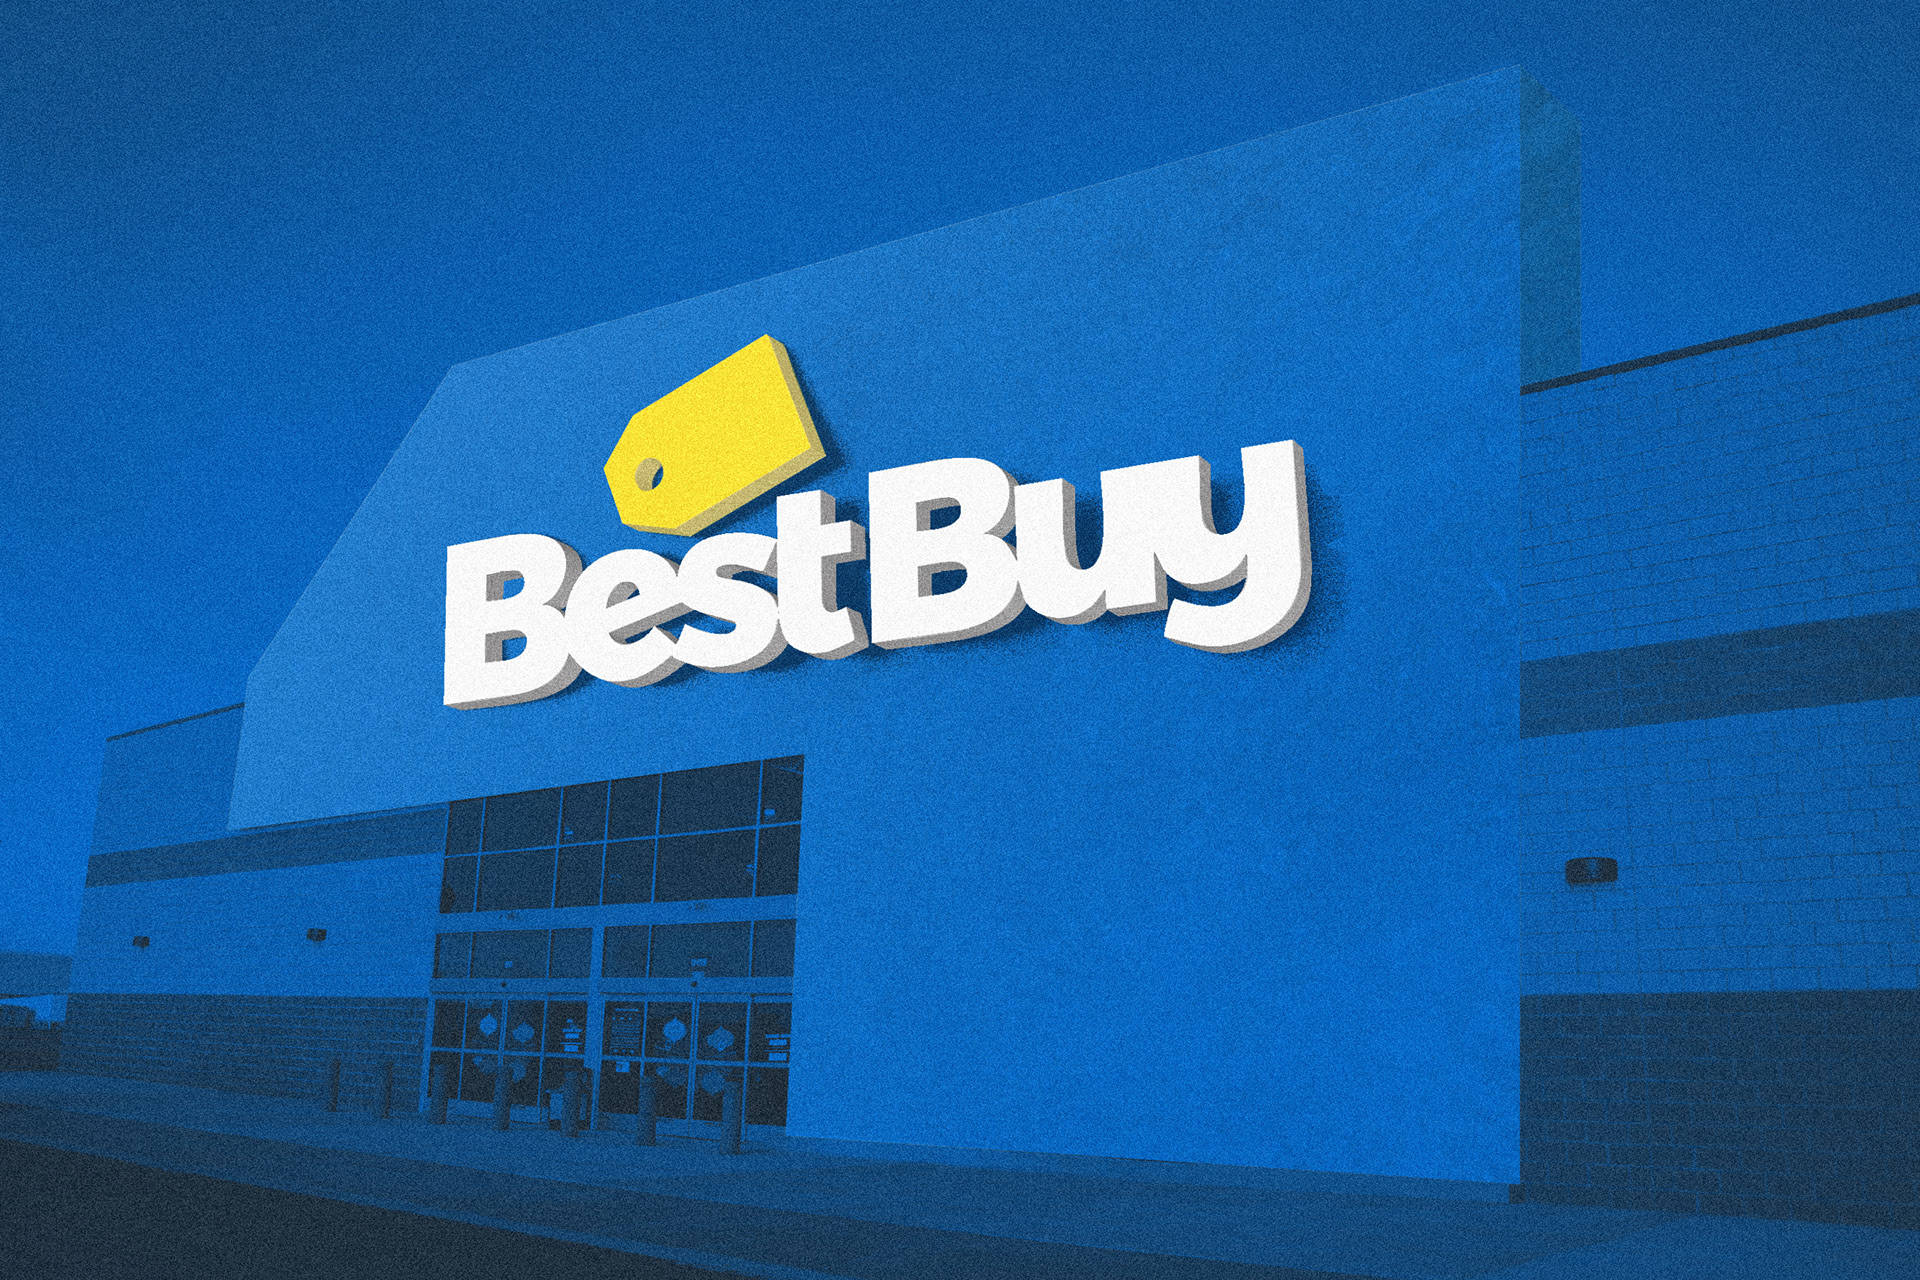 Blåbest Buy-butik (this Does Not Relate To Computer Or Mobile Wallpaper Specifically. If You Could Provide More Context, I Could Make A More Accurate Translation.) Wallpaper